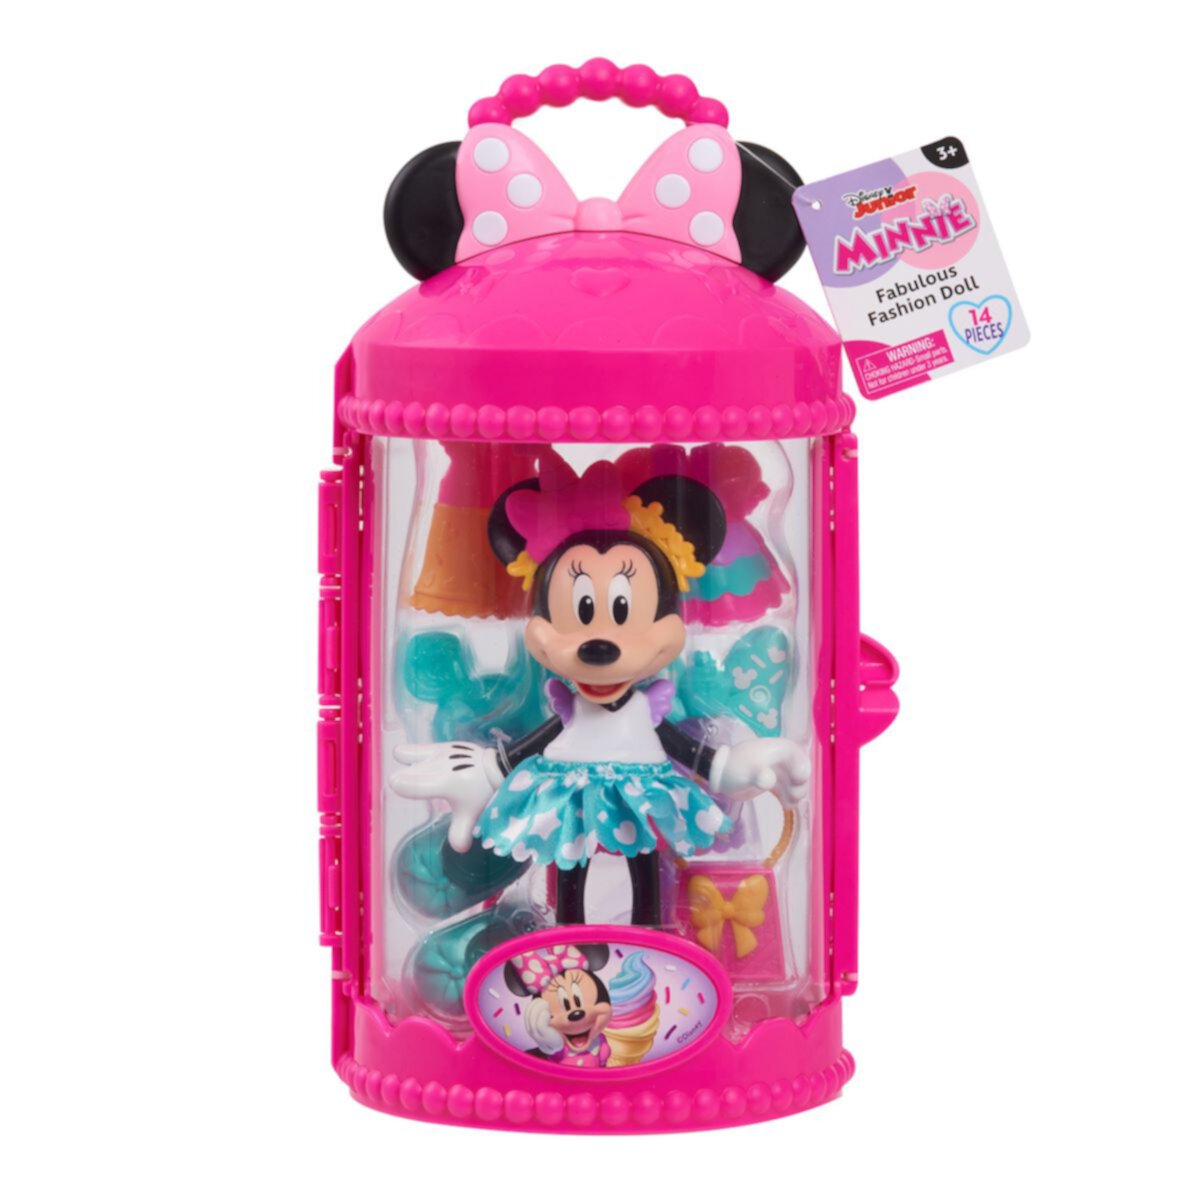 Disney Junior Minnie Mouse Sweet Party Fashion Doll with Case by Just Play Just Play